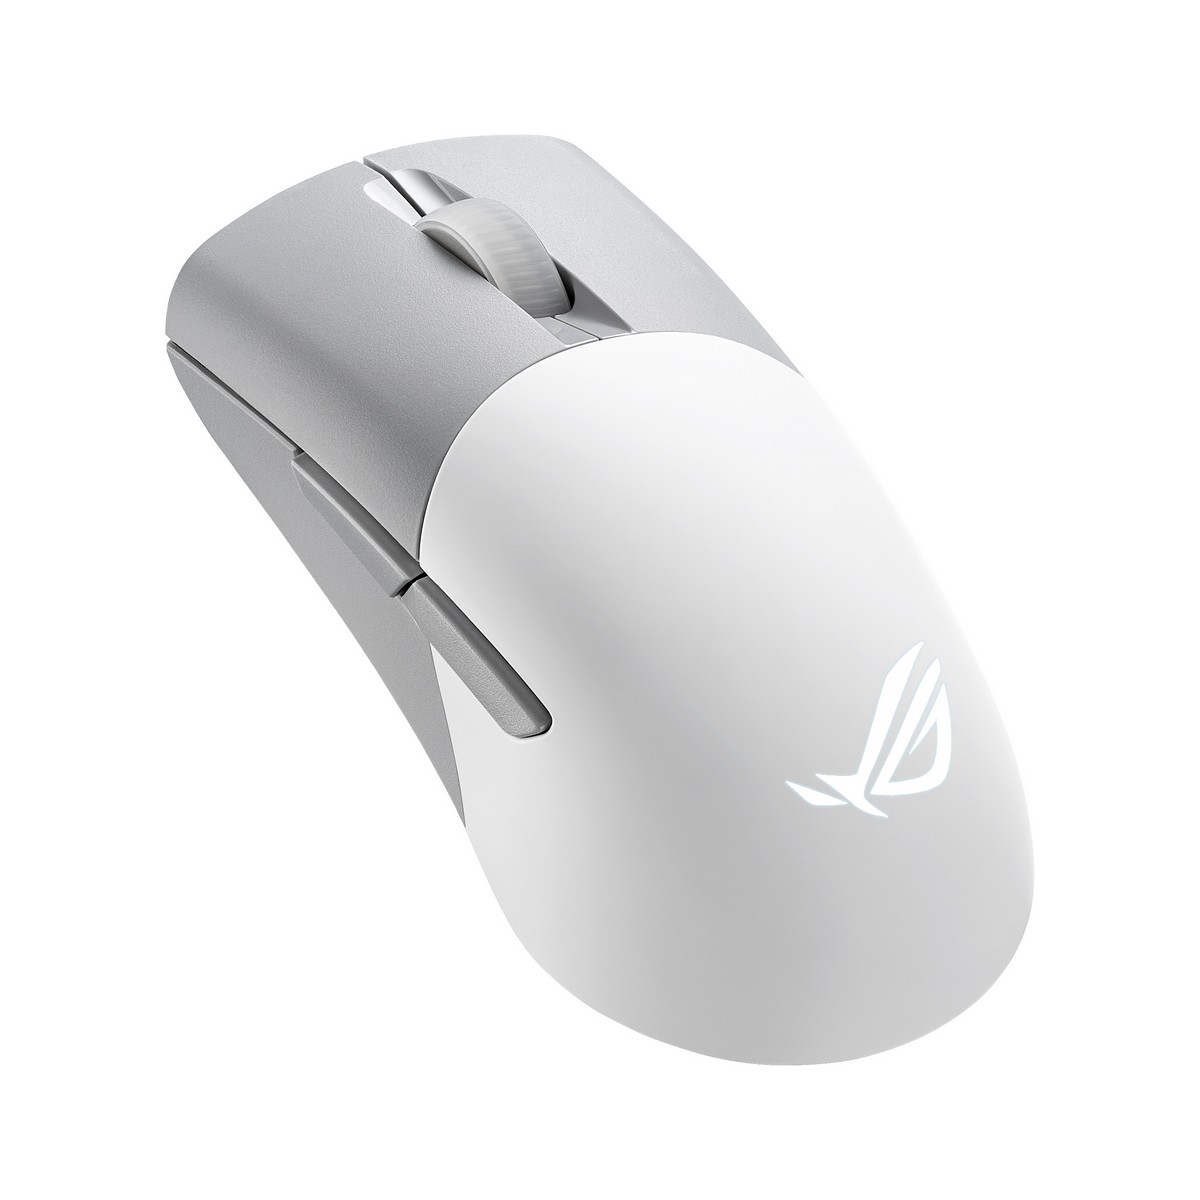 Asus - ASUS ROG Keris Wireless Aimpoint Wireless Gaming Mouse - White (90MP02V0-BMUA10)